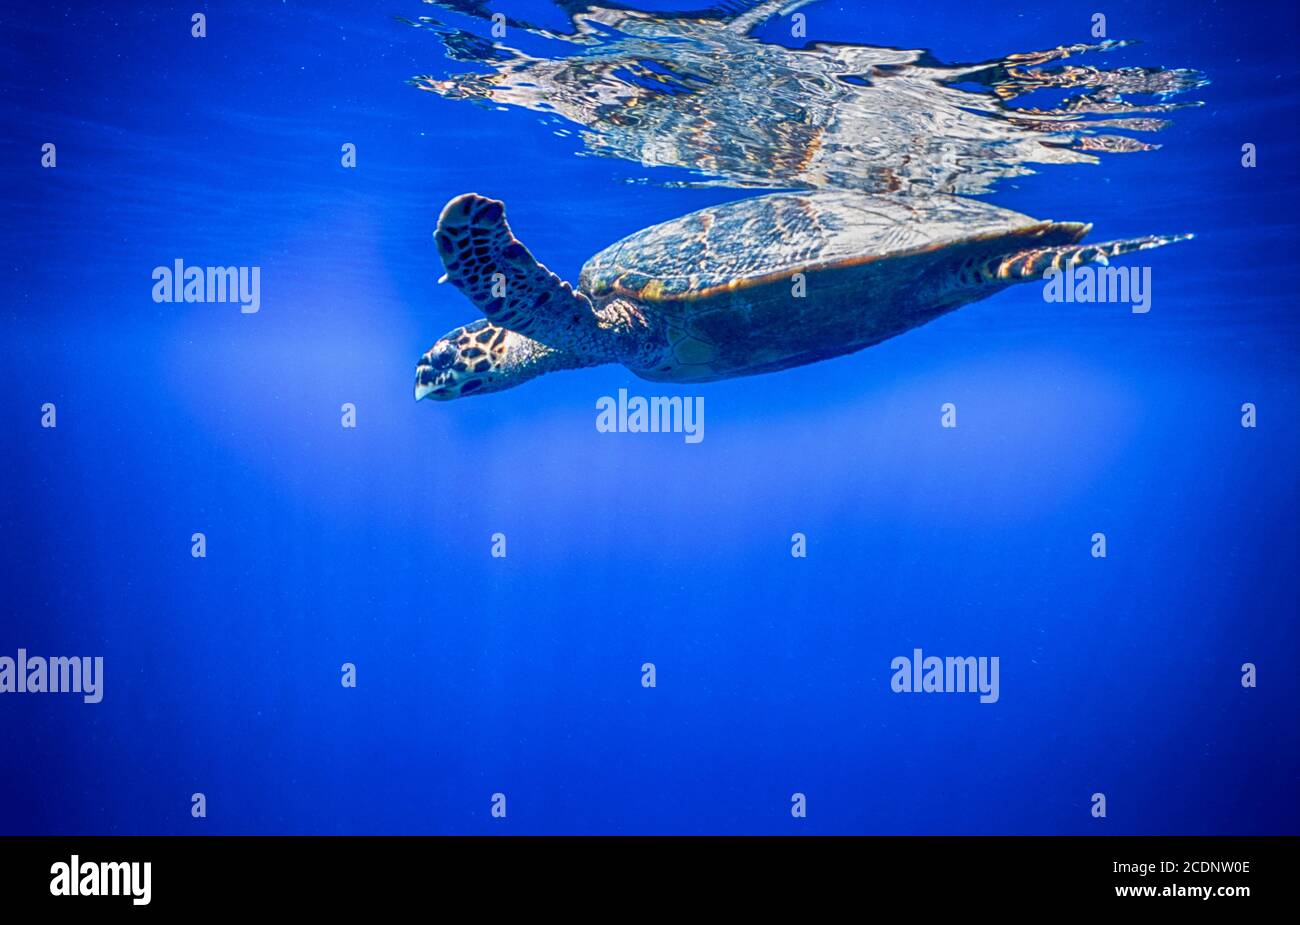 Hawksbill turtle, Eretmochelys imbricata, swimming in outer reef zone, Ari Atoll, Maldives. Archive image 2002. High resolution scan from transparency, August 2020. Credit: Malcolm Park/Alamy. Stock Photo